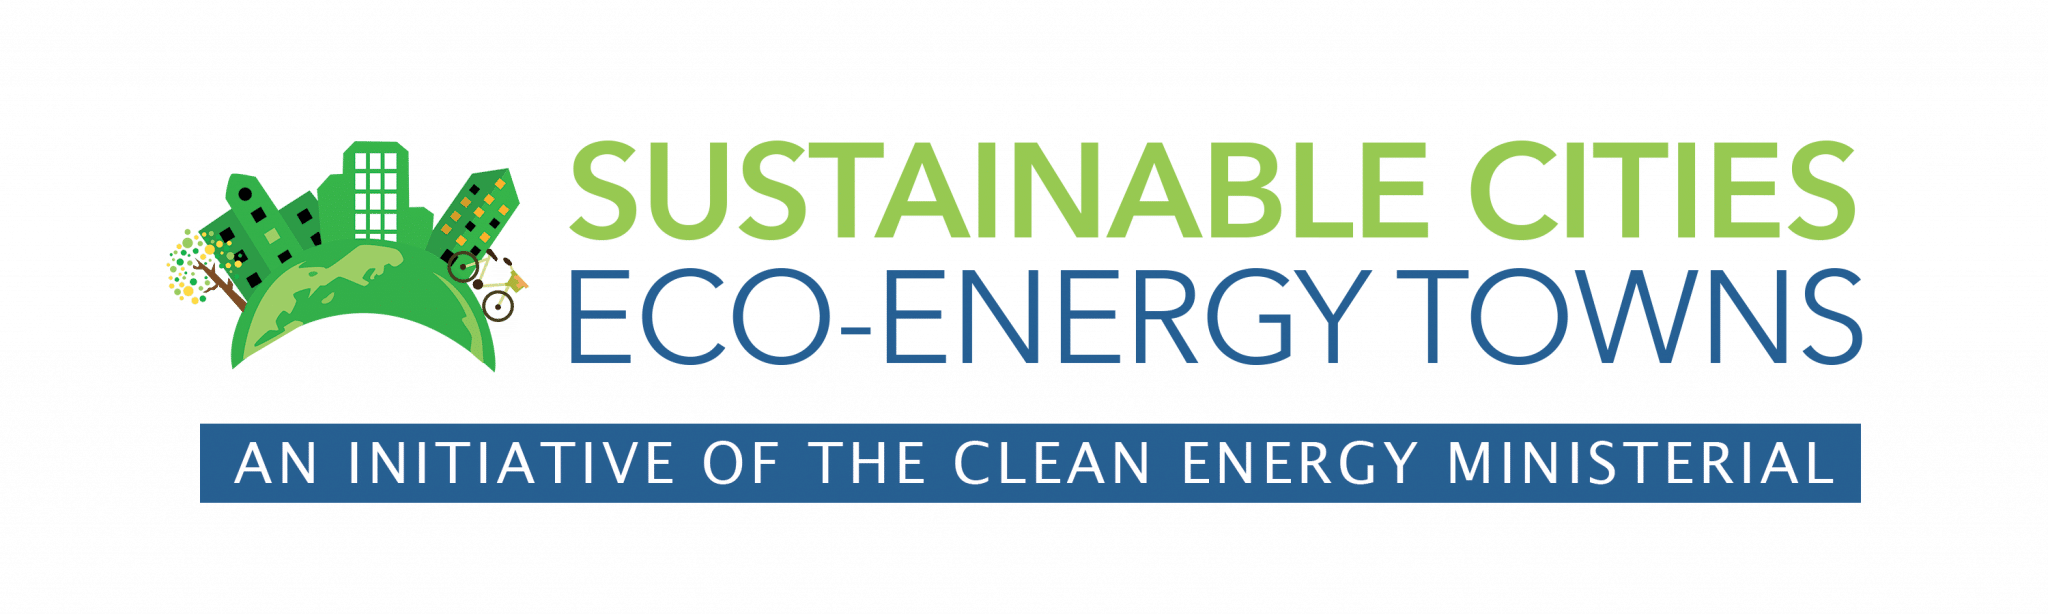 Sustainable Cities and EcoEnergy Towns (CSET) Clean Energy Ministerial